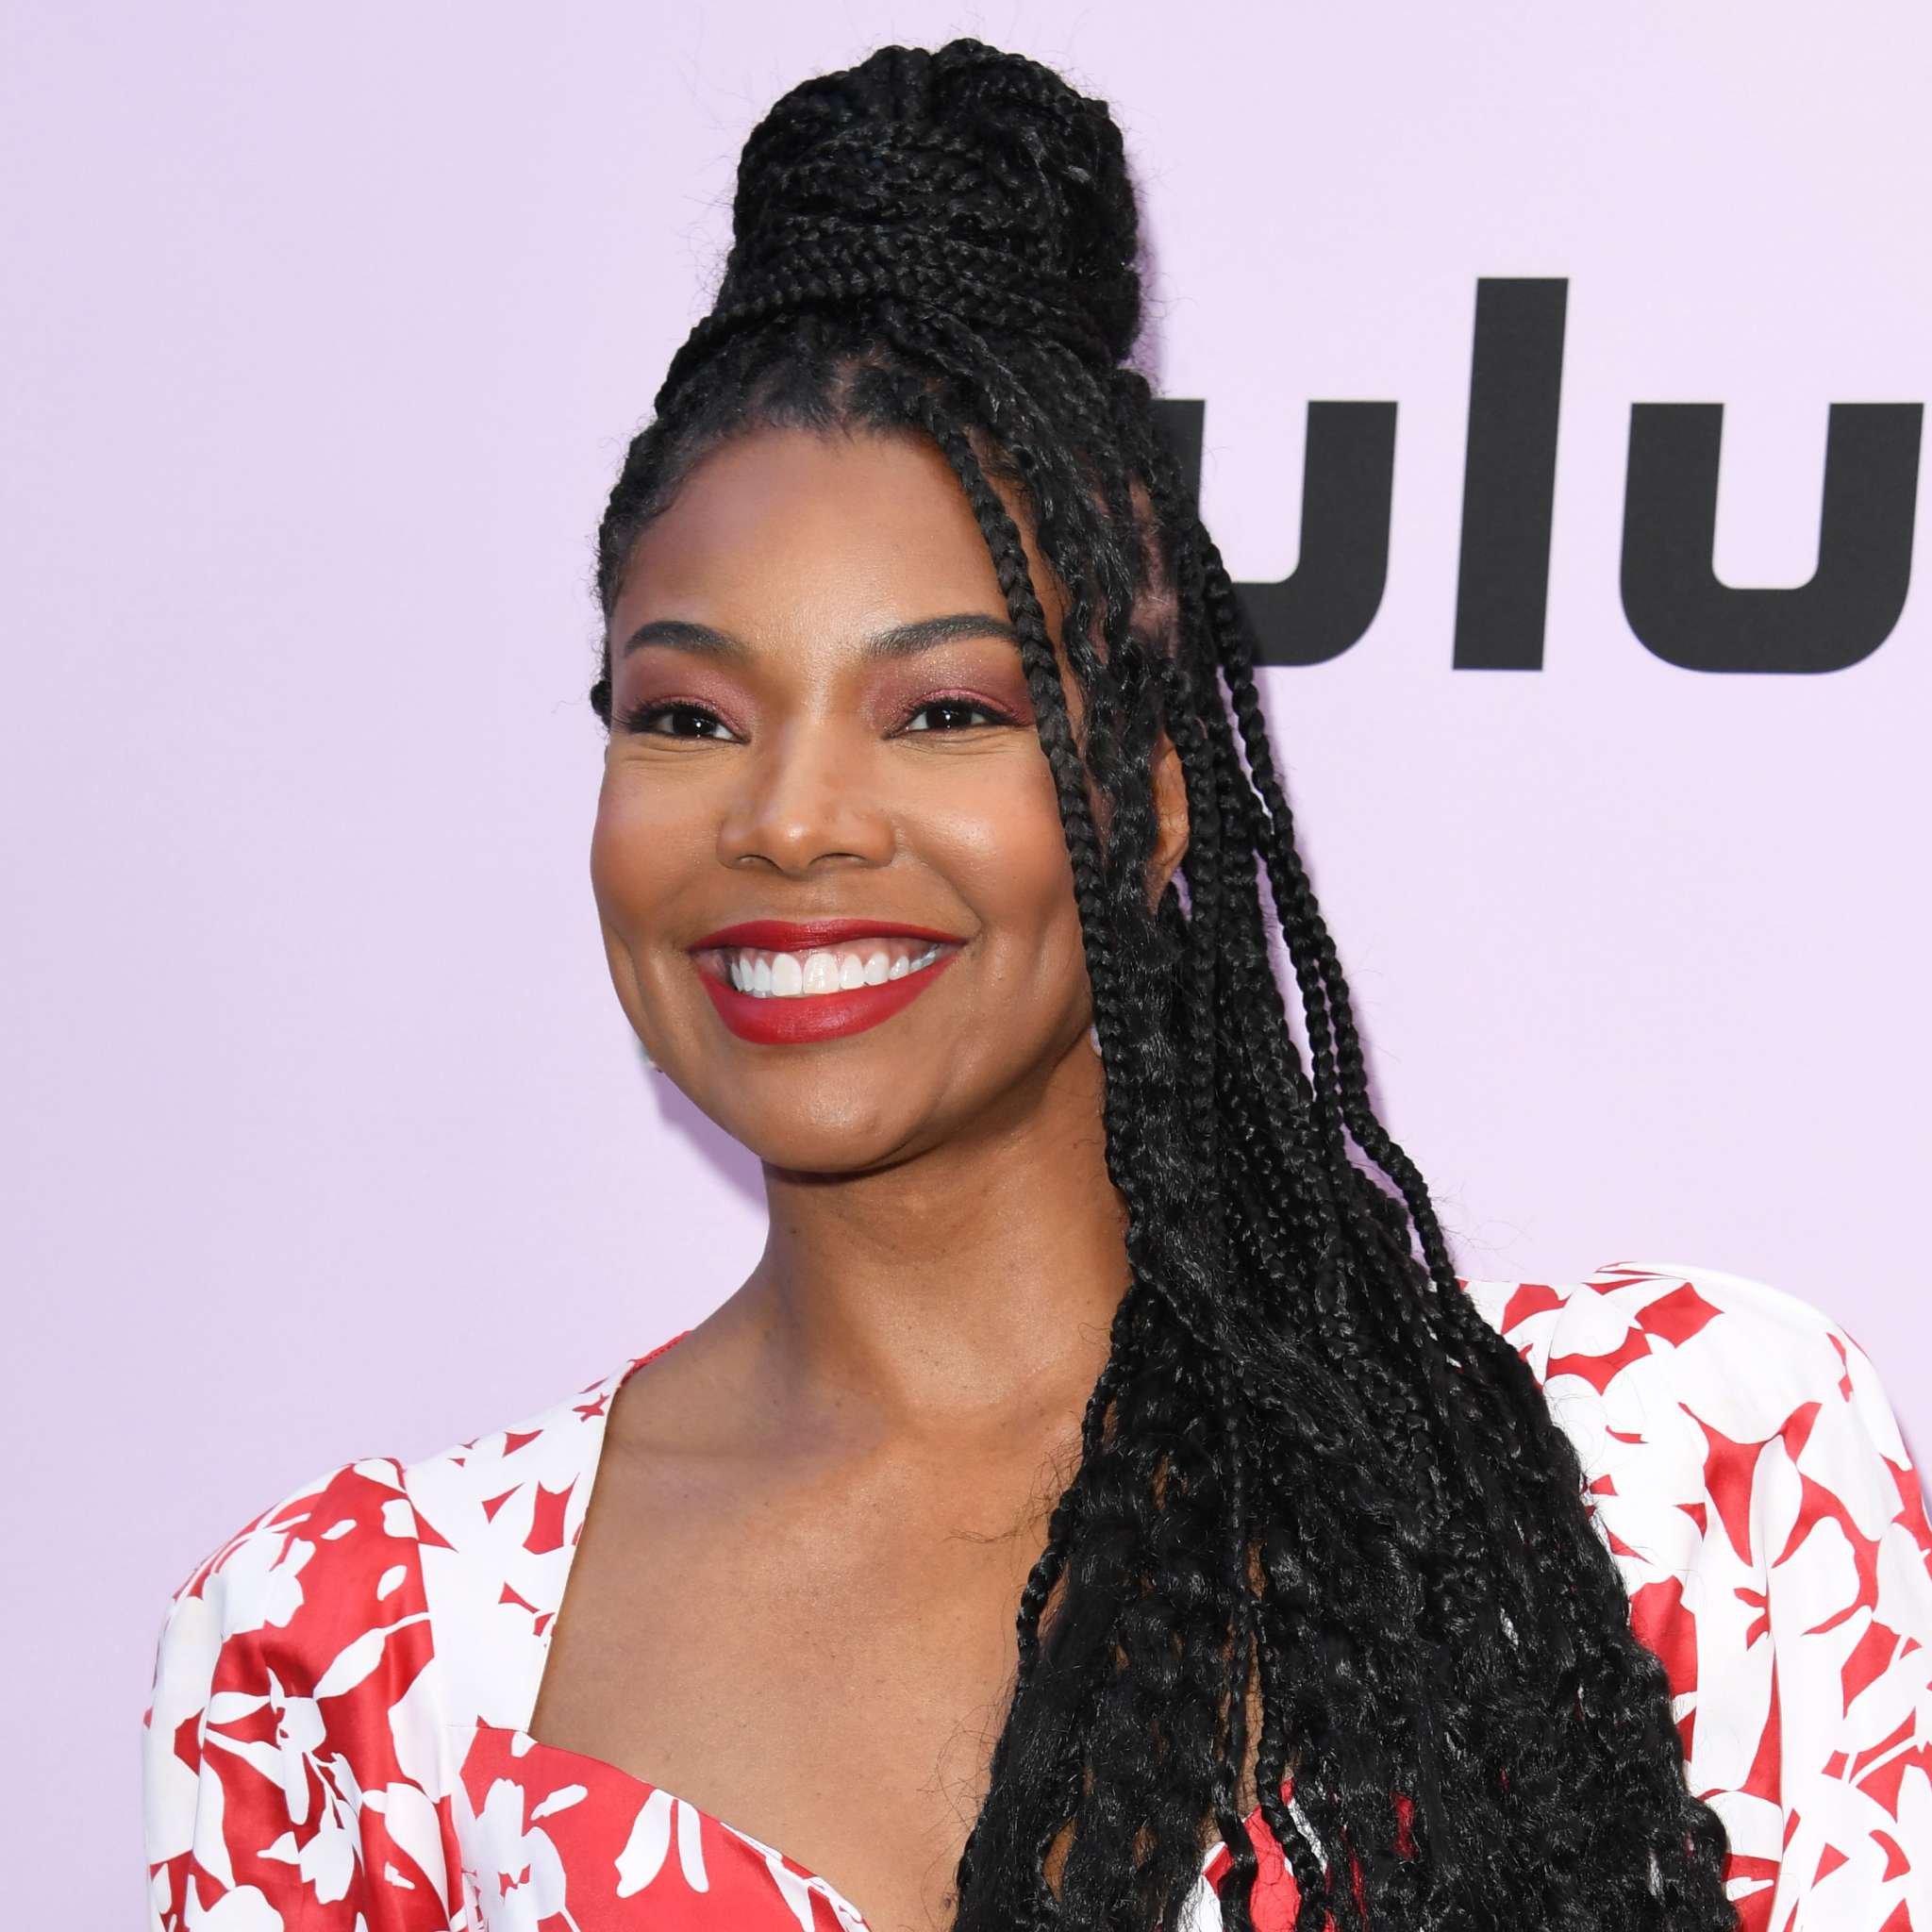 ”gabrielle-union-gushes-over-lady-london-and-pens-an-emotional-message”